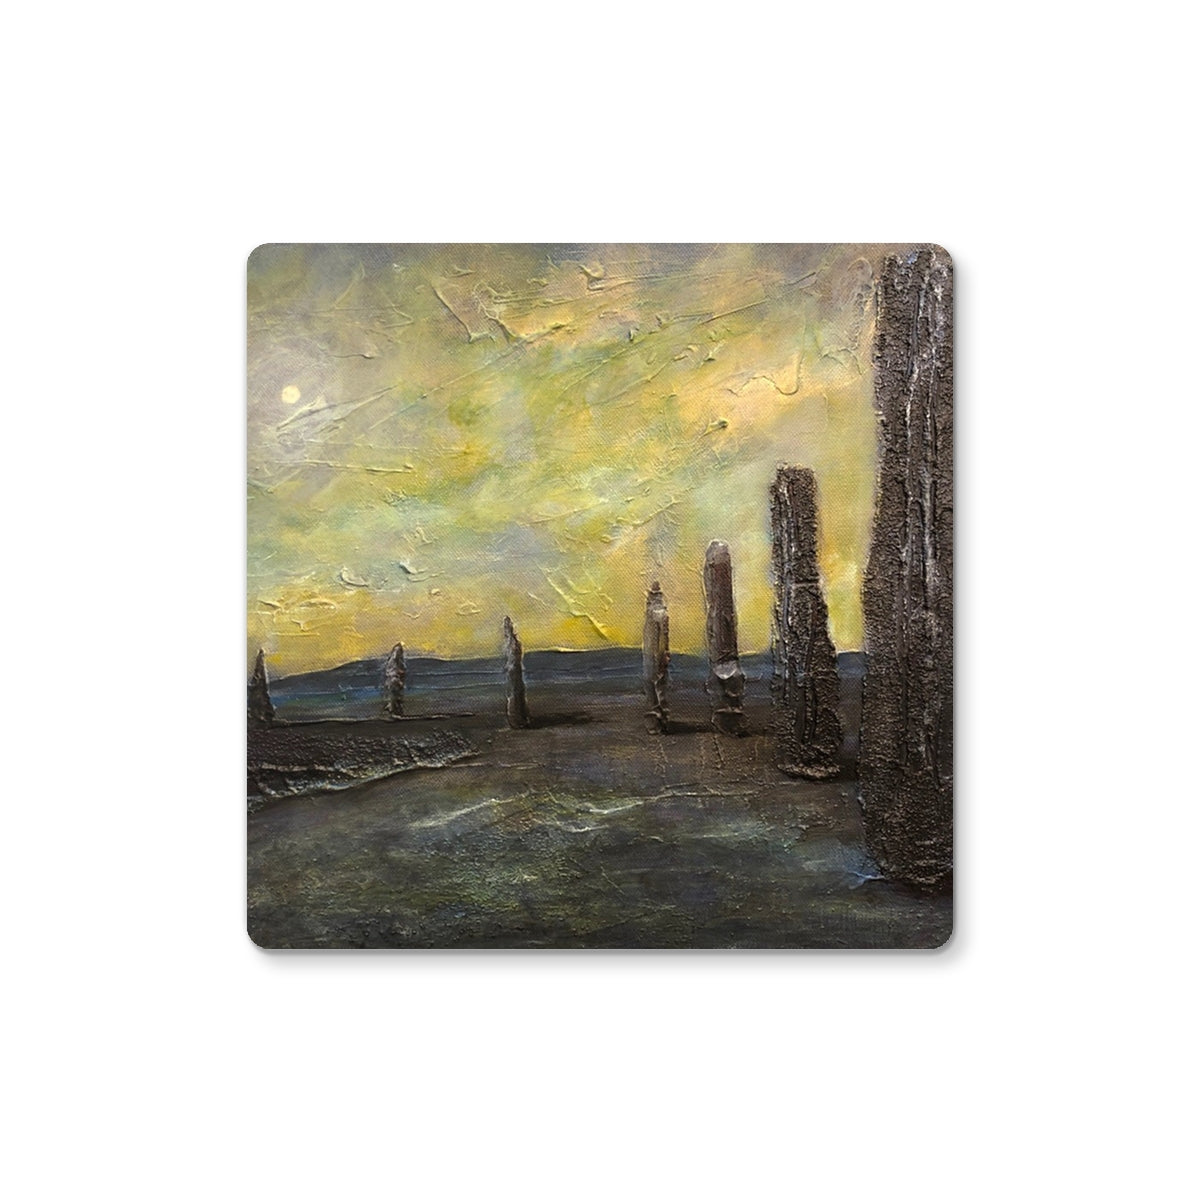 An Ethereal Ring Of Brodgar Art Gifts Coaster-Coasters-Orkney Art Gallery-2 Coasters-Paintings, Prints, Homeware, Art Gifts From Scotland By Scottish Artist Kevin Hunter